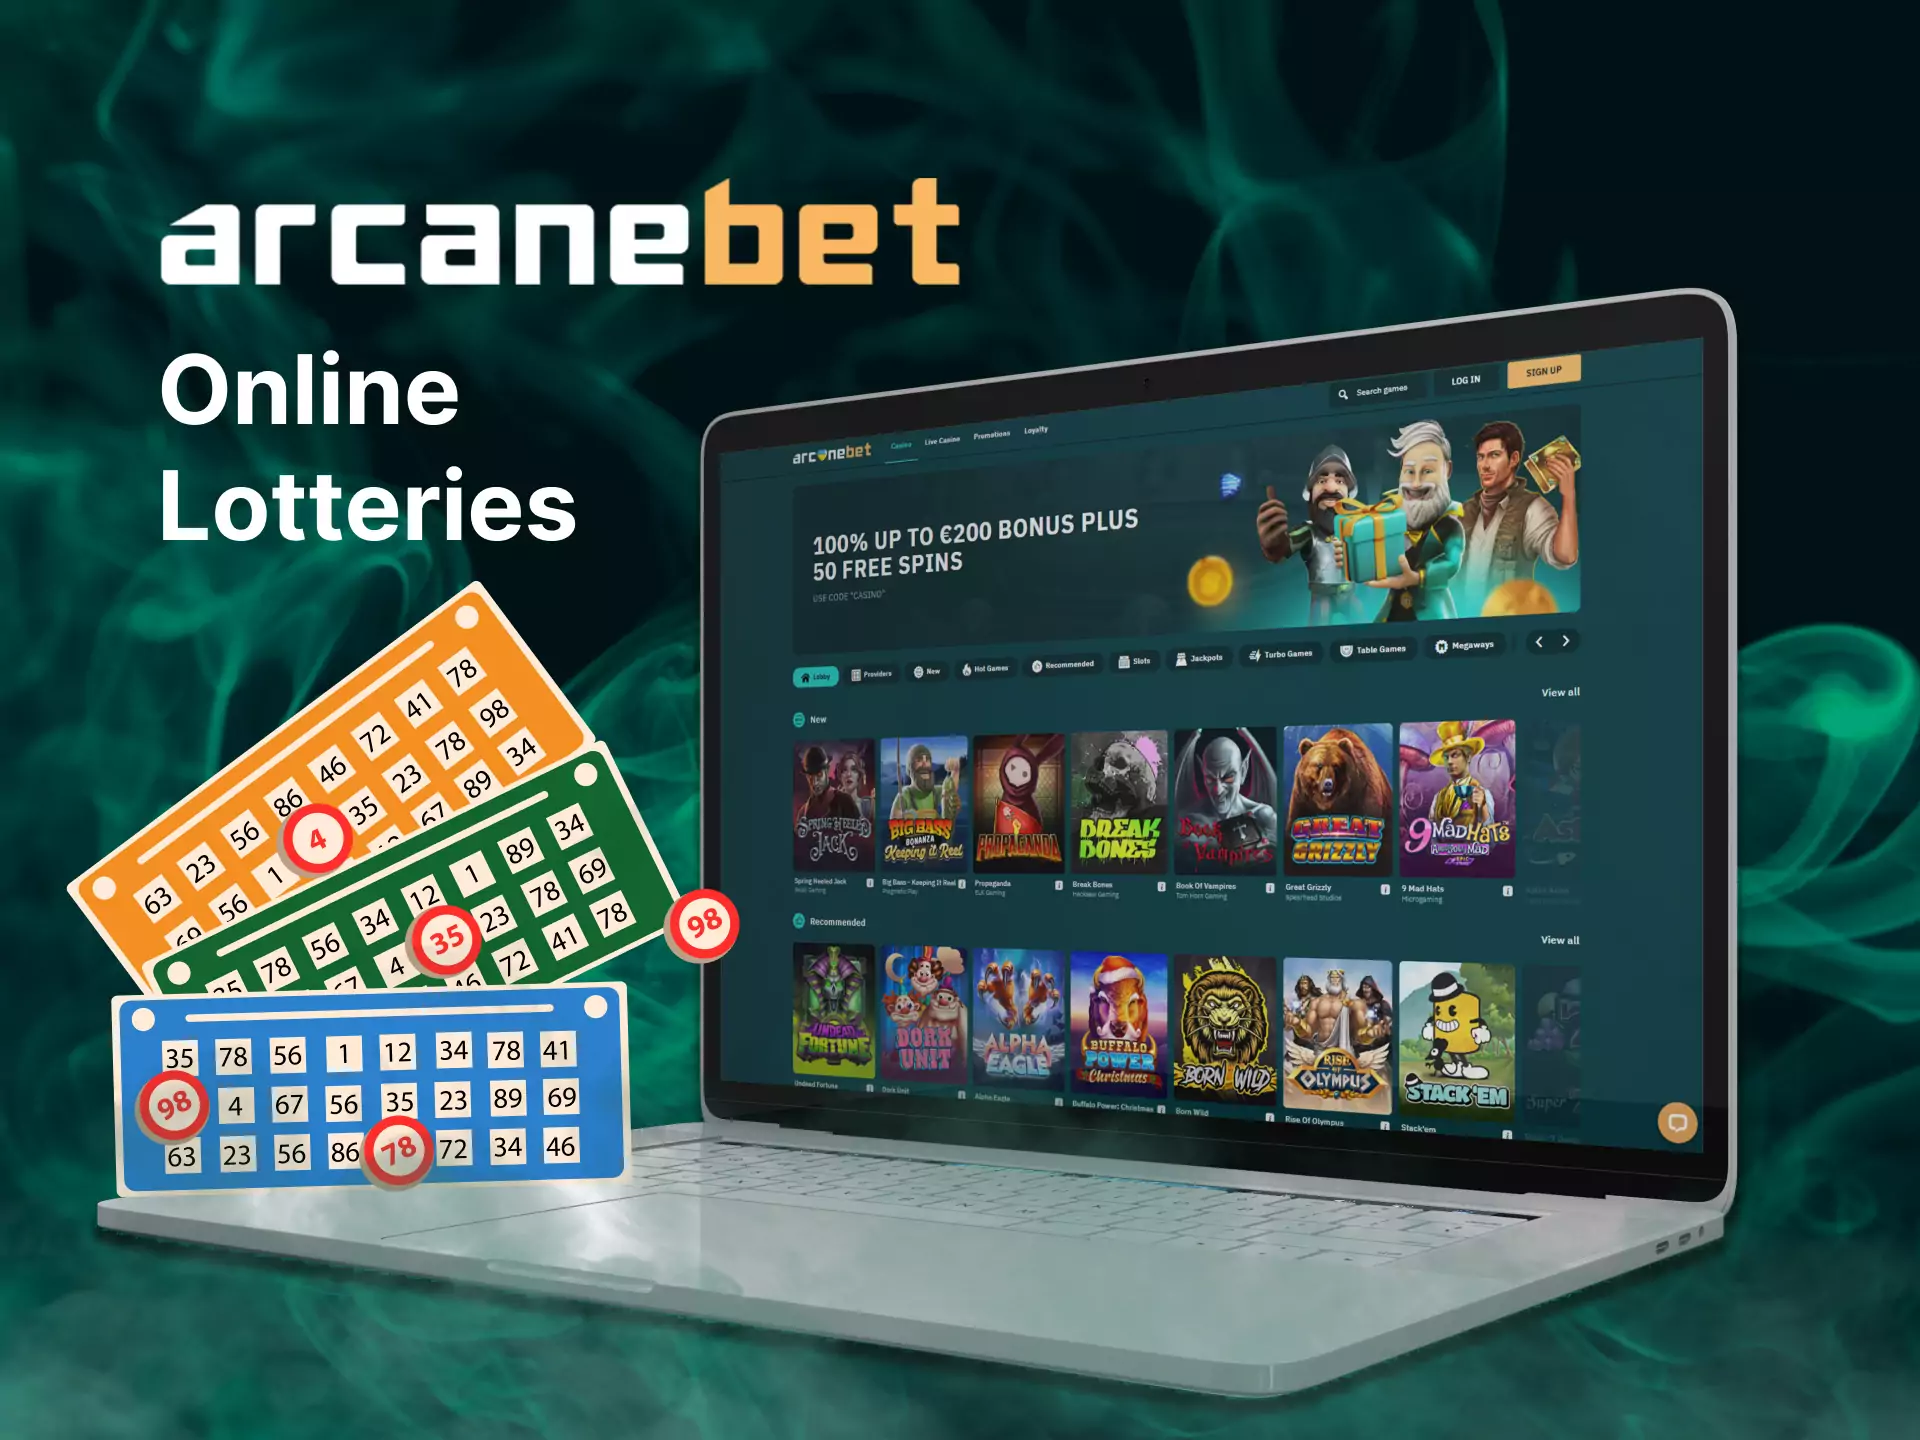 Play with pleasure in online lotteries on Arcanebet.